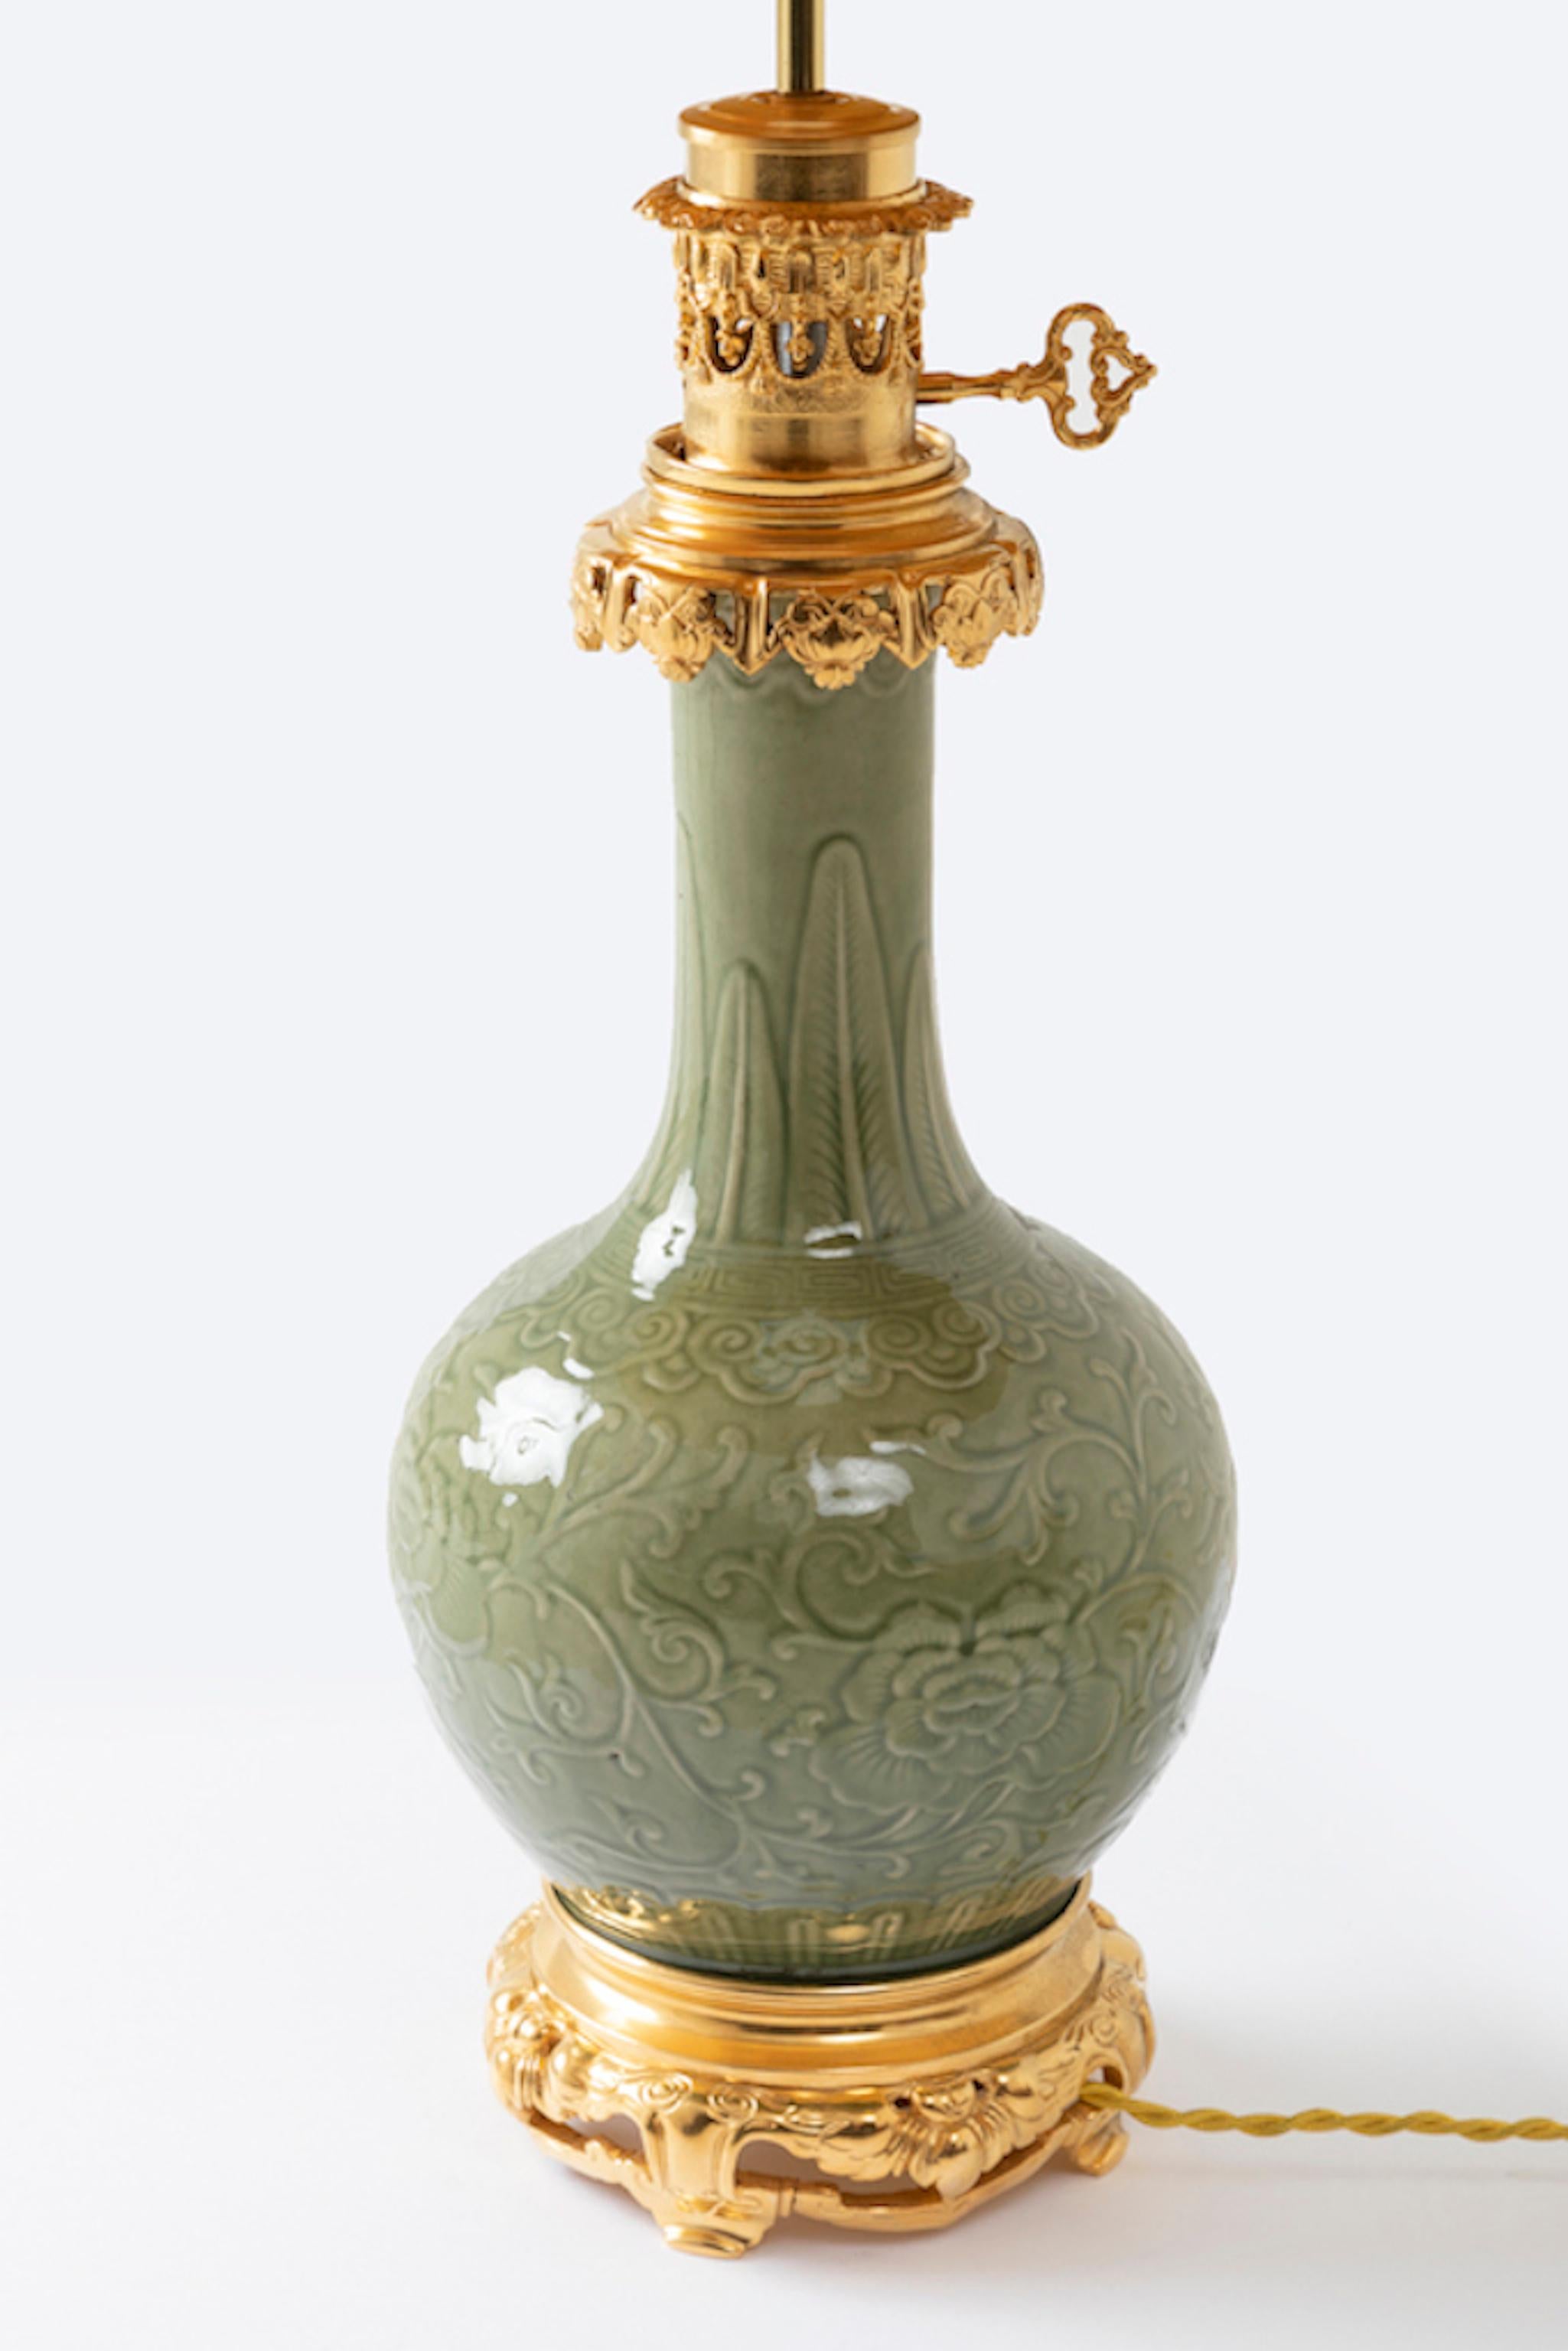 Unknown Celadon Porcelain Lamp with a Relief Decor and Gilt Bronze Mount, circa 1880